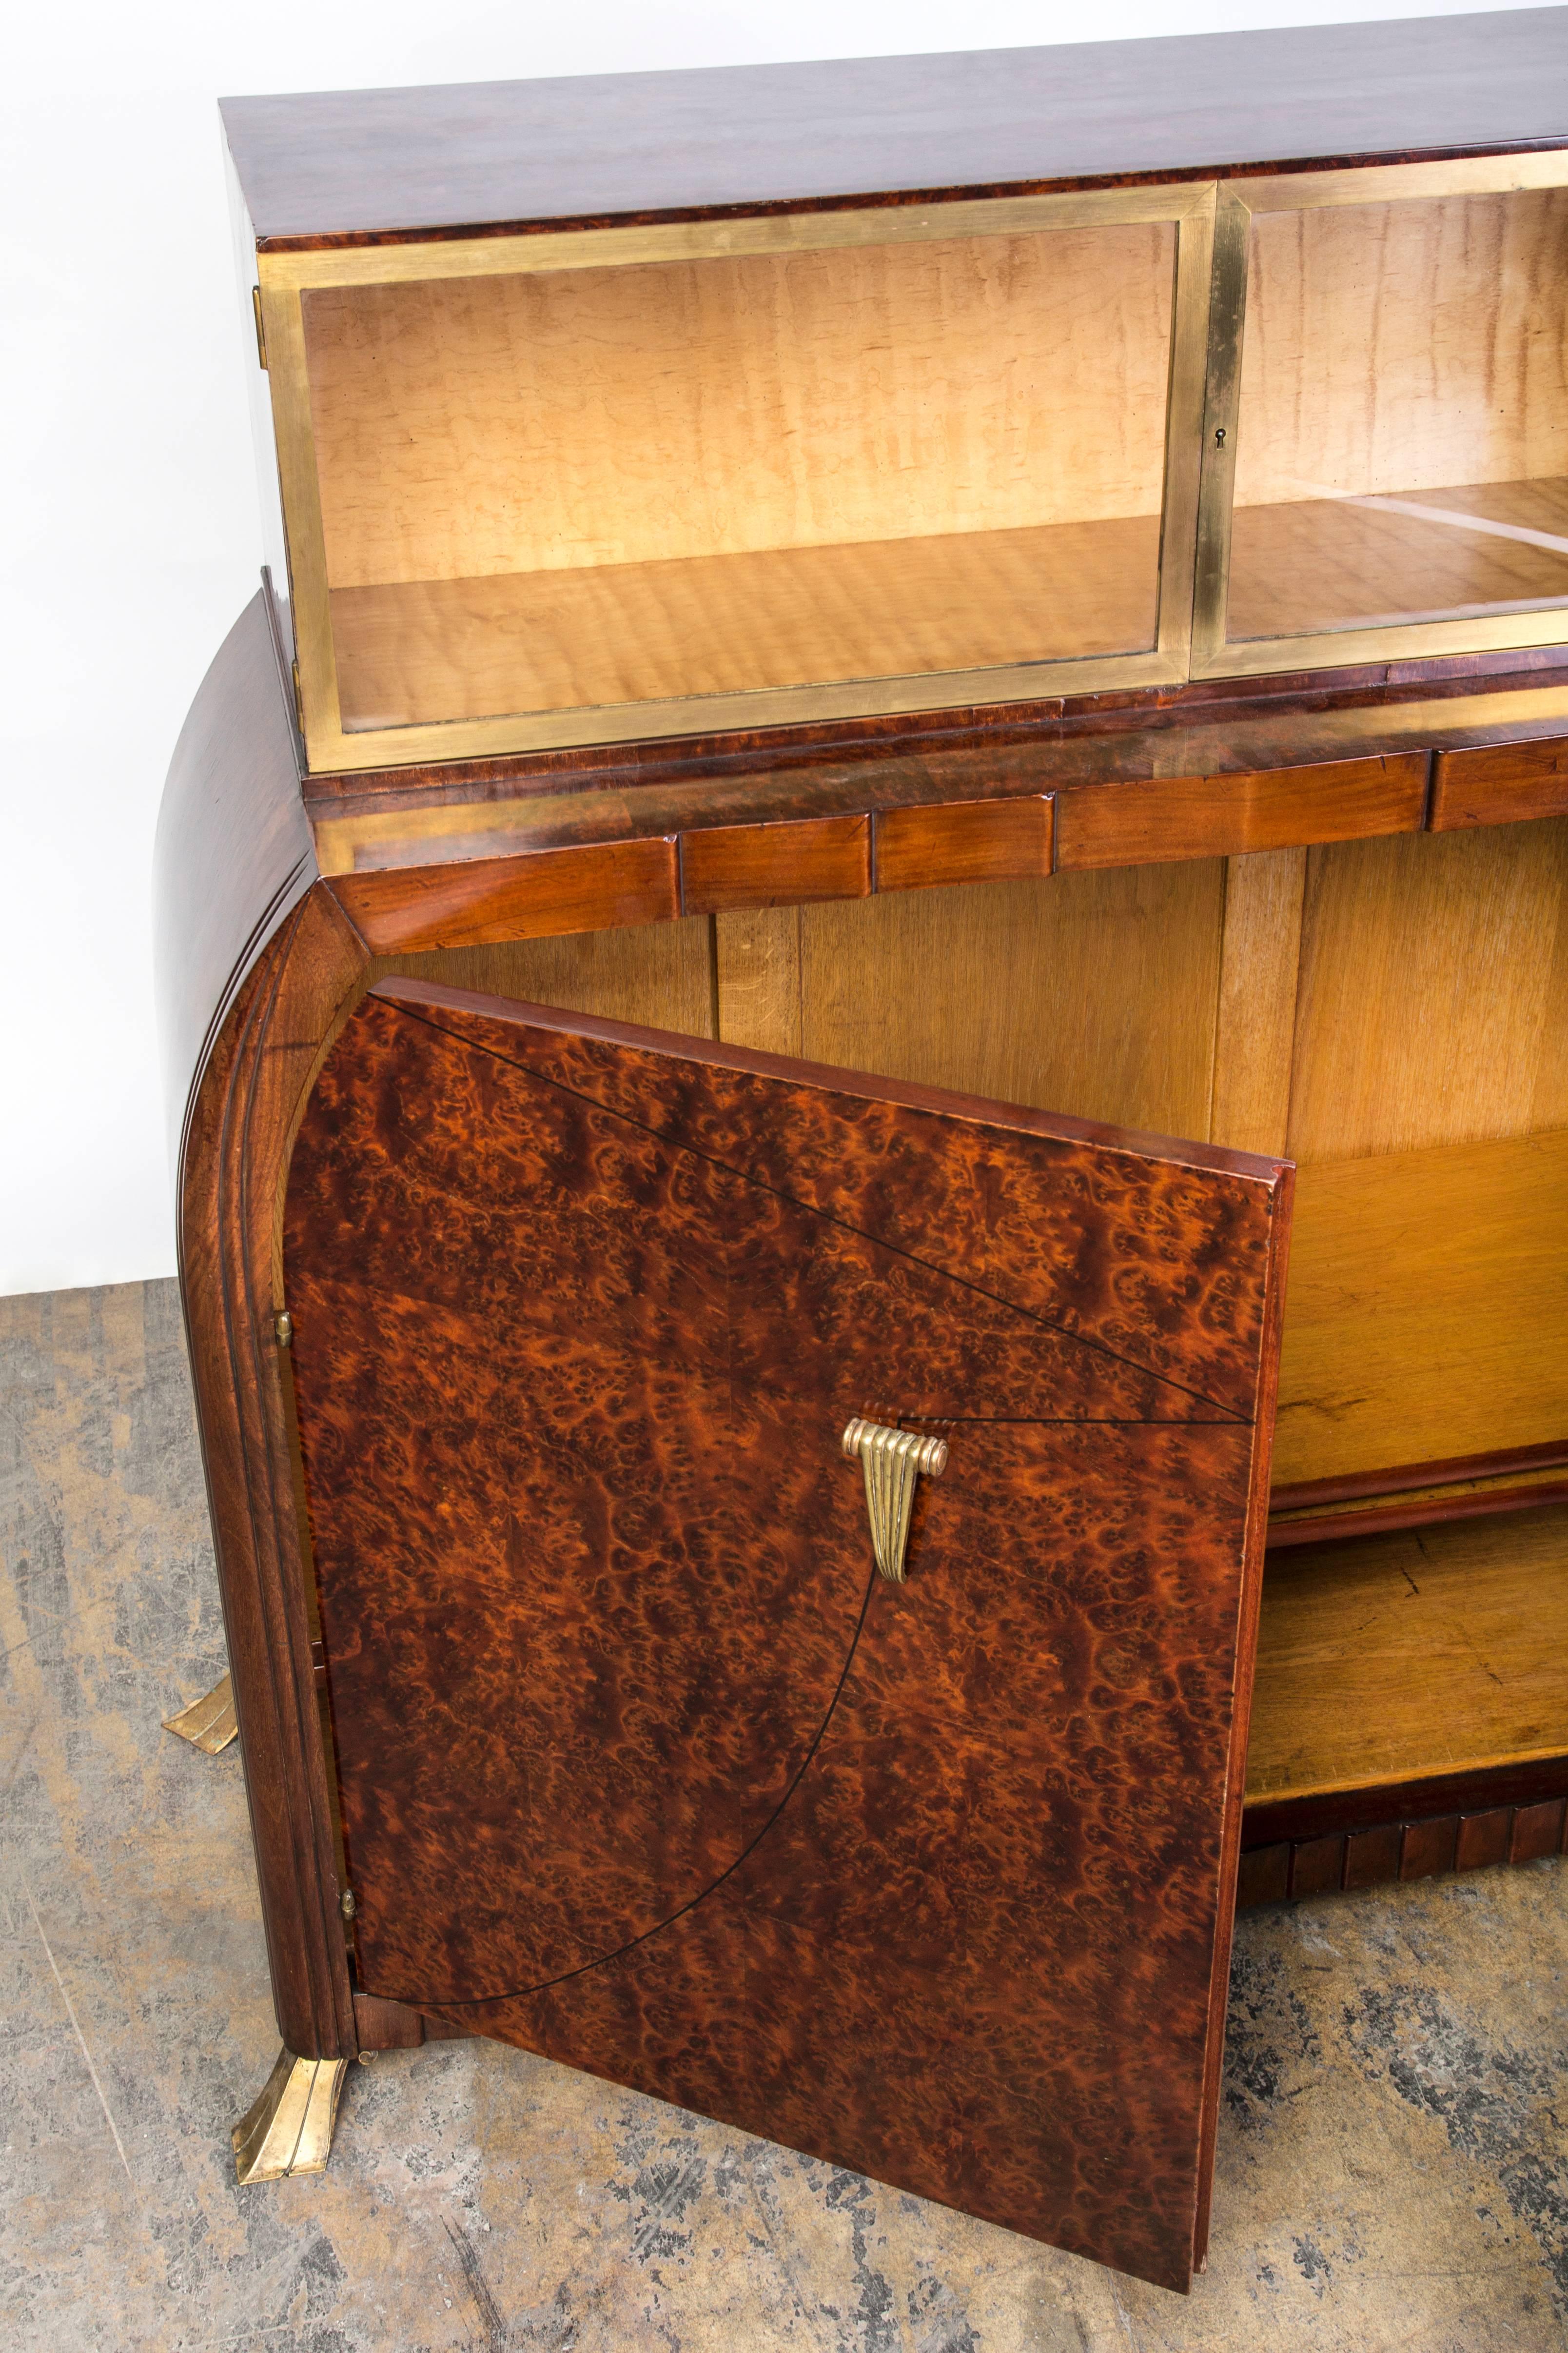 This exquisite signed Art Deco sideboard/dresser by Roger Bal is a one of a kind. It features a beautiful bookmatched mahogany burl and detailing in ebony inlays on the doors. This piece has ample storage with bronze detailing accents on the doors